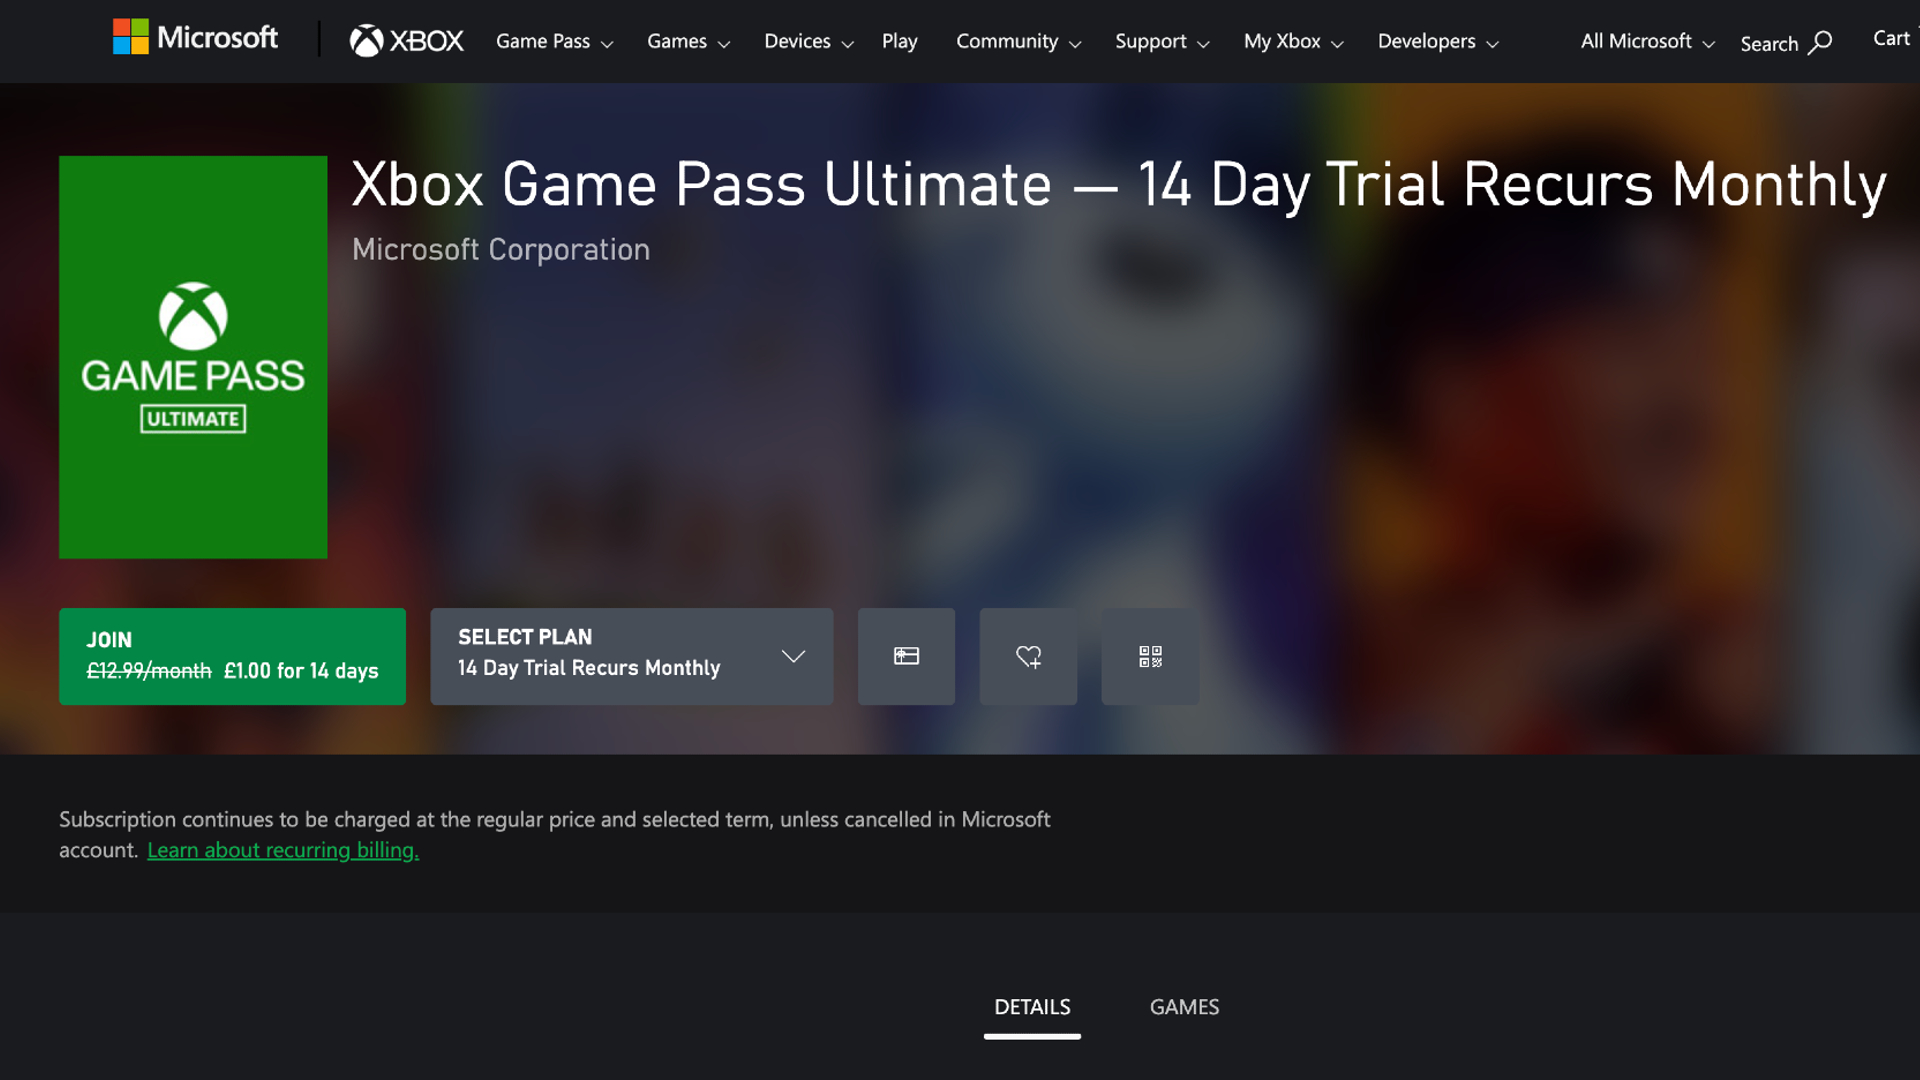 Microsoft has paused the Game Pass trial offer ahead of Starfield launch